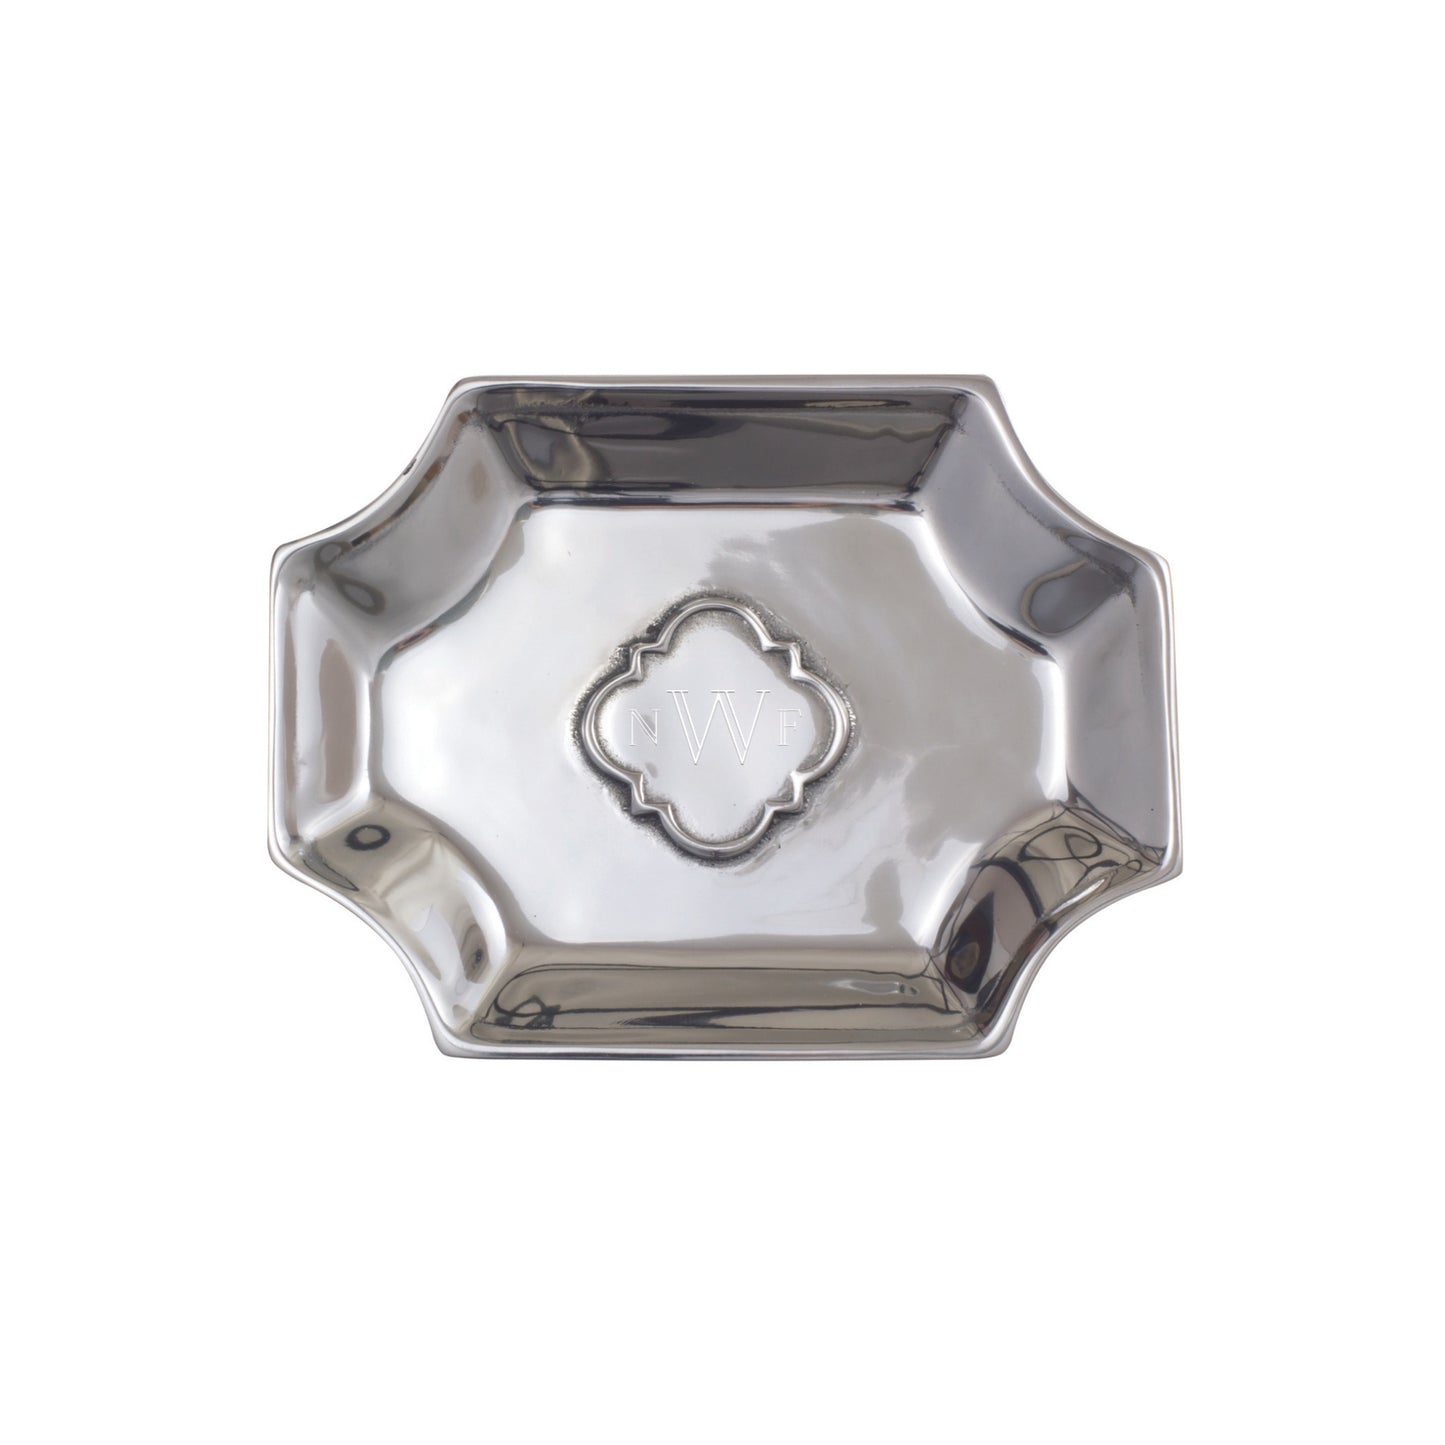 Templeton Silver Divot Vanity Tray that's showing an engraved monogram